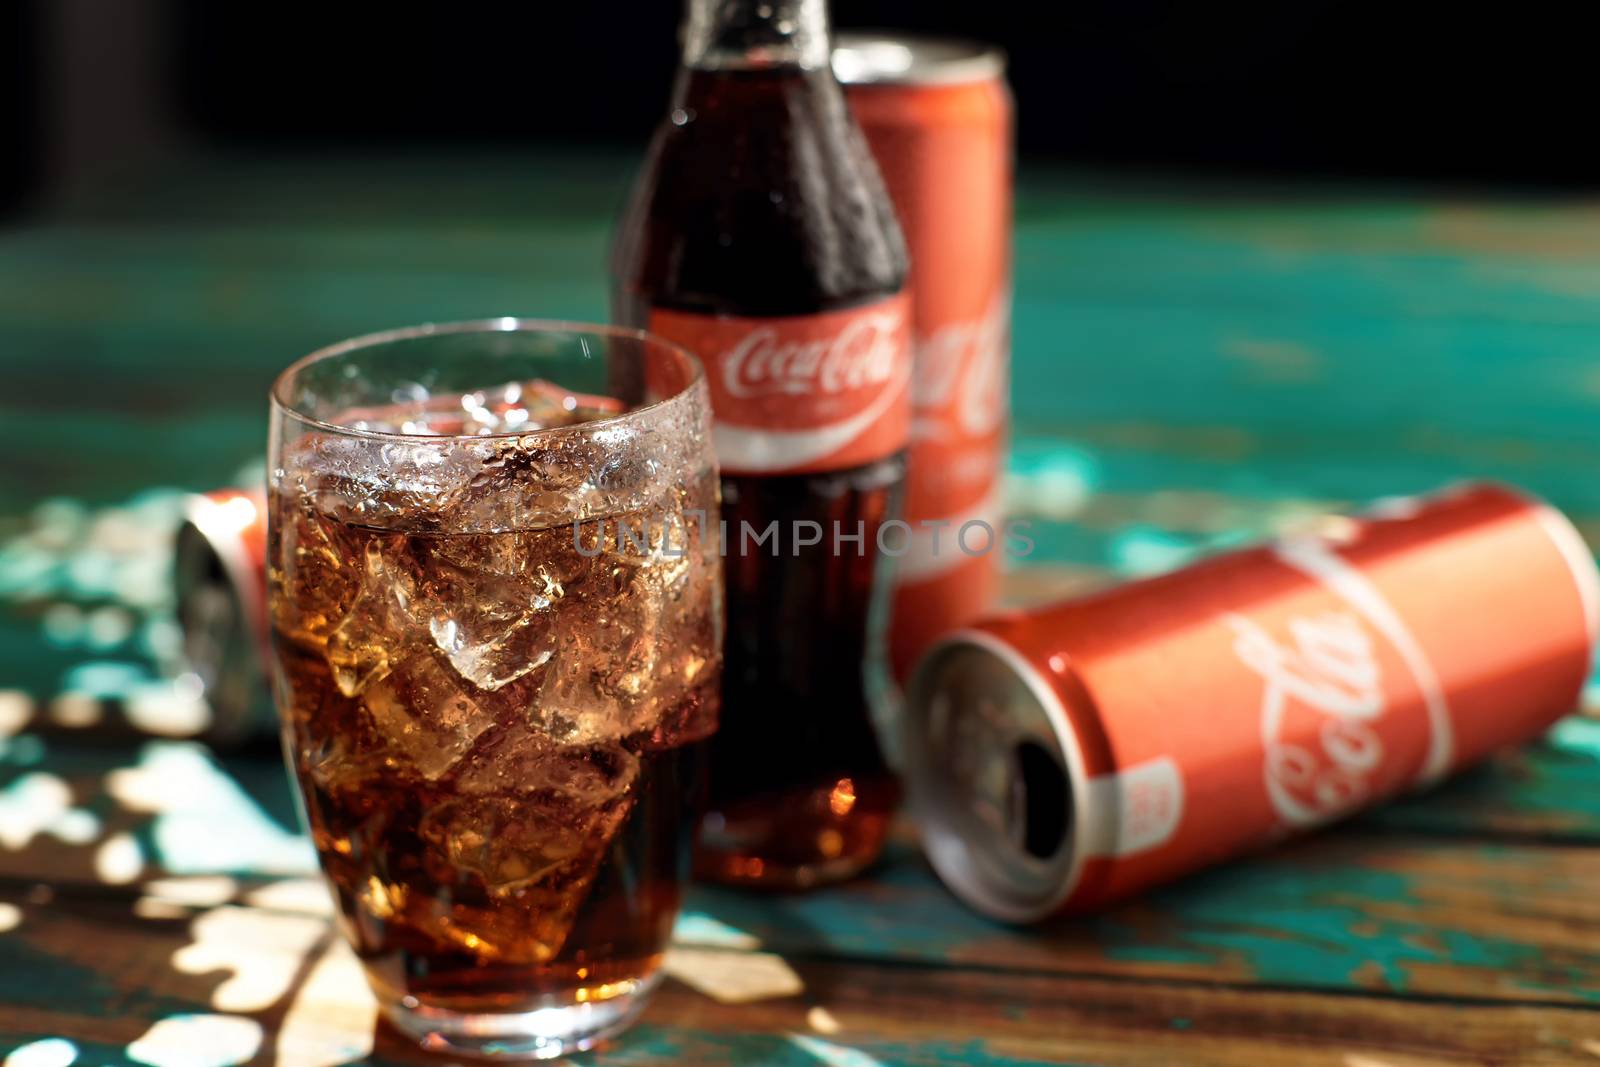 Coca-Cola is a carbonated soft drink popular all over the world. She is sold in restaurants, stores, everywhere.